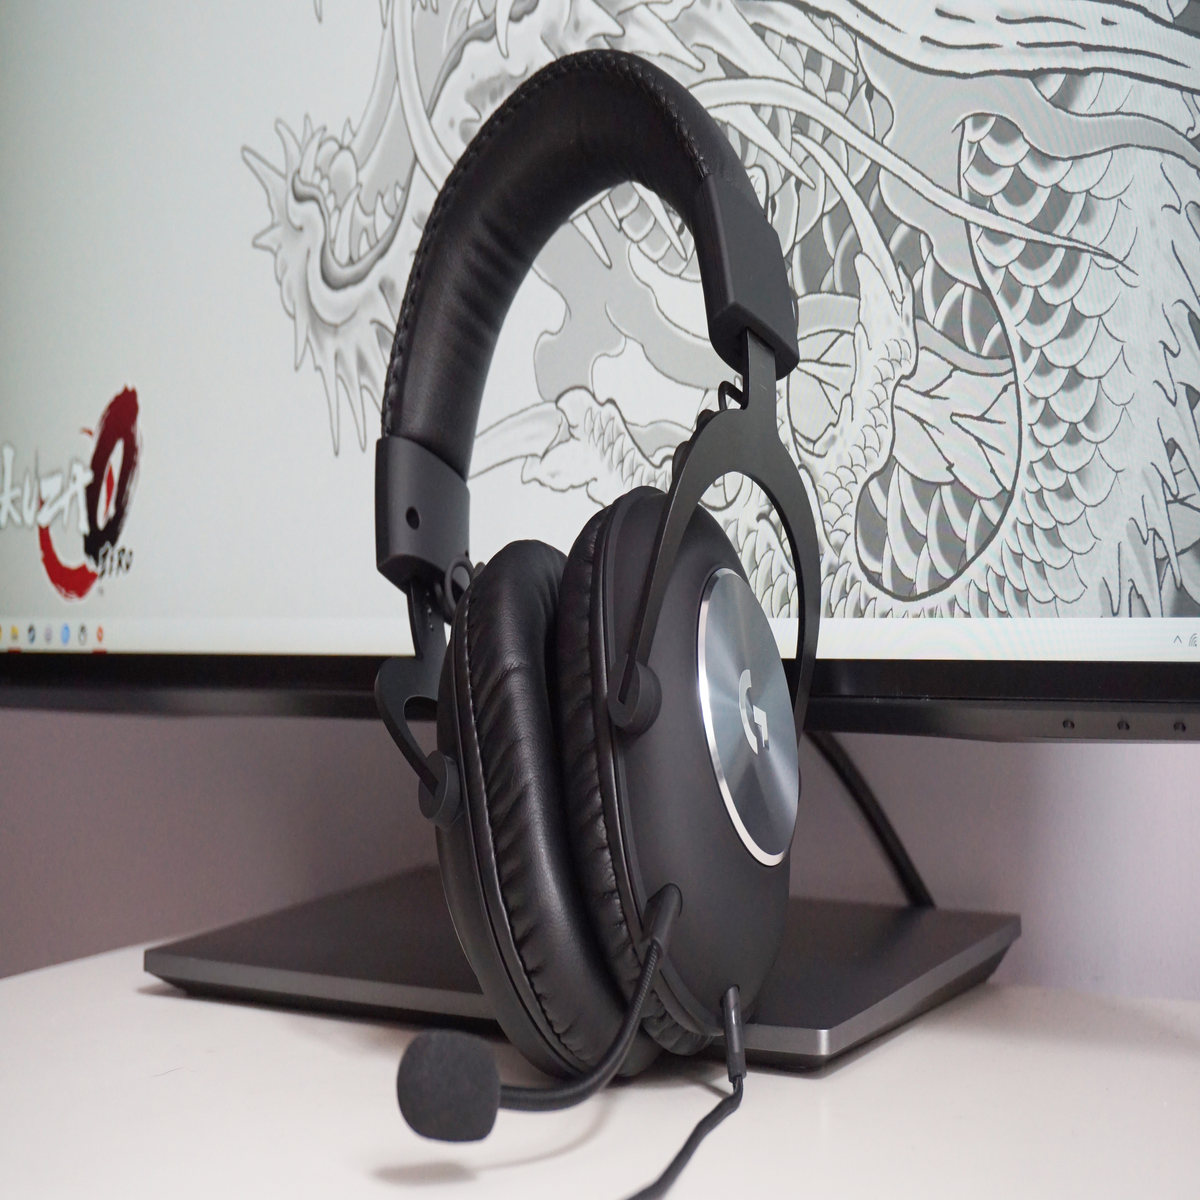 Logitech G Pro X Gaming Headset Review - IGN